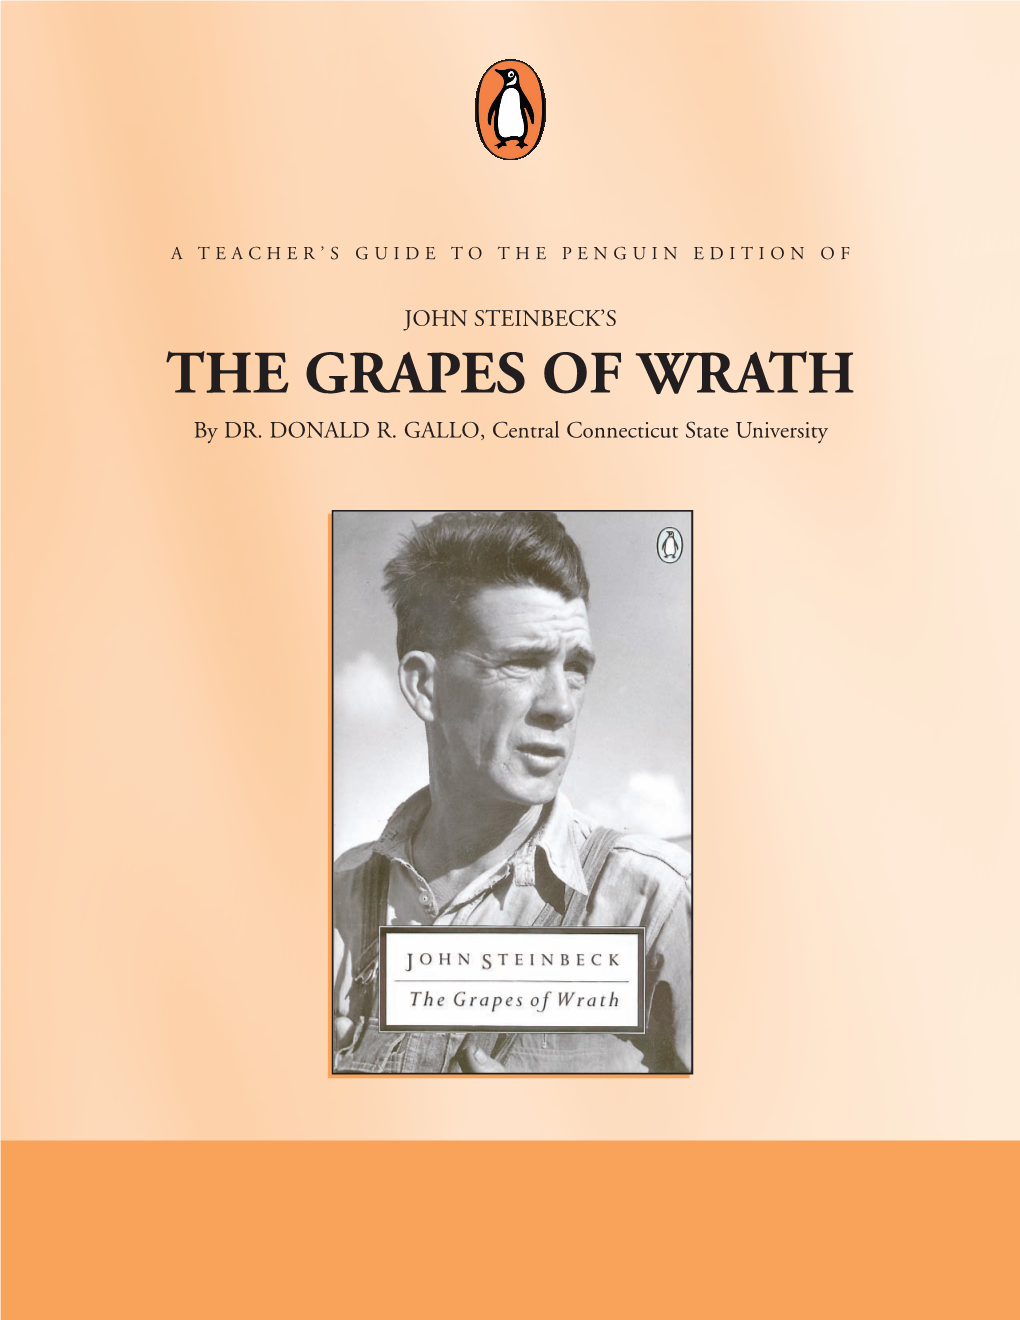 Teacher's Guide to the Grapes of Wrath